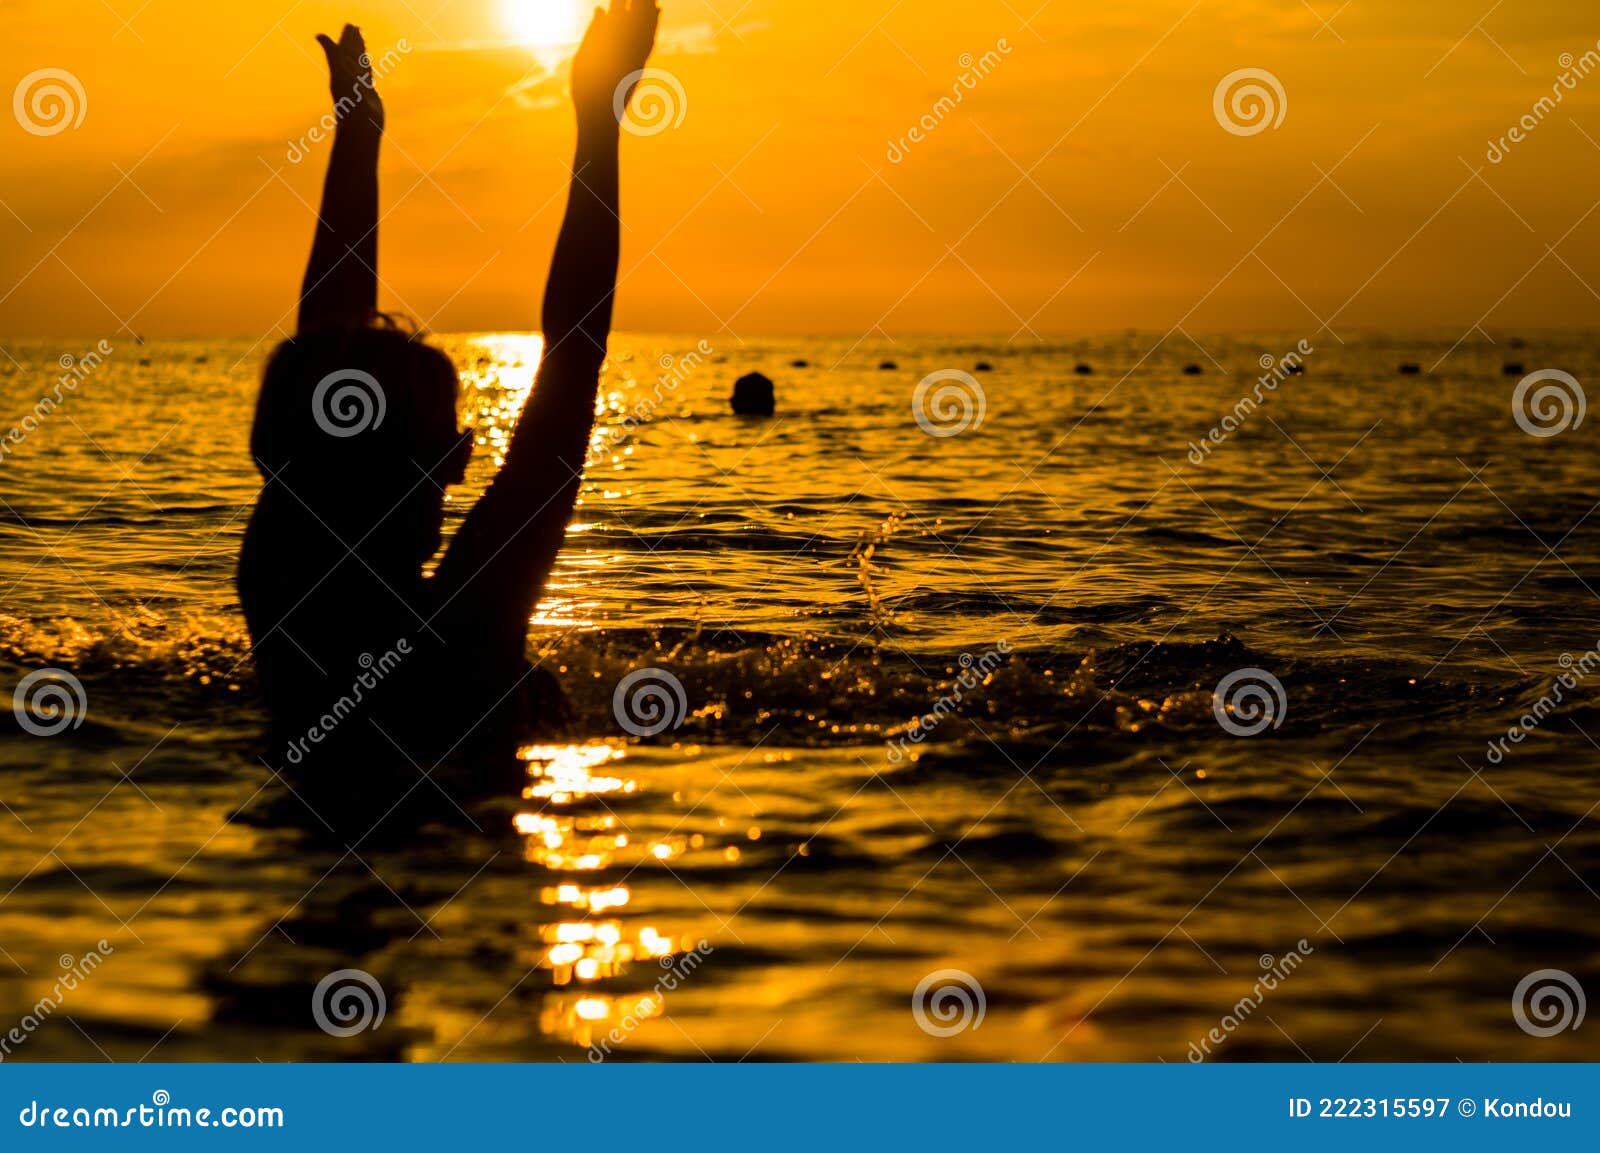 Girl Swimming in the Sea at Sunset, Splashes of Transparency Water ...